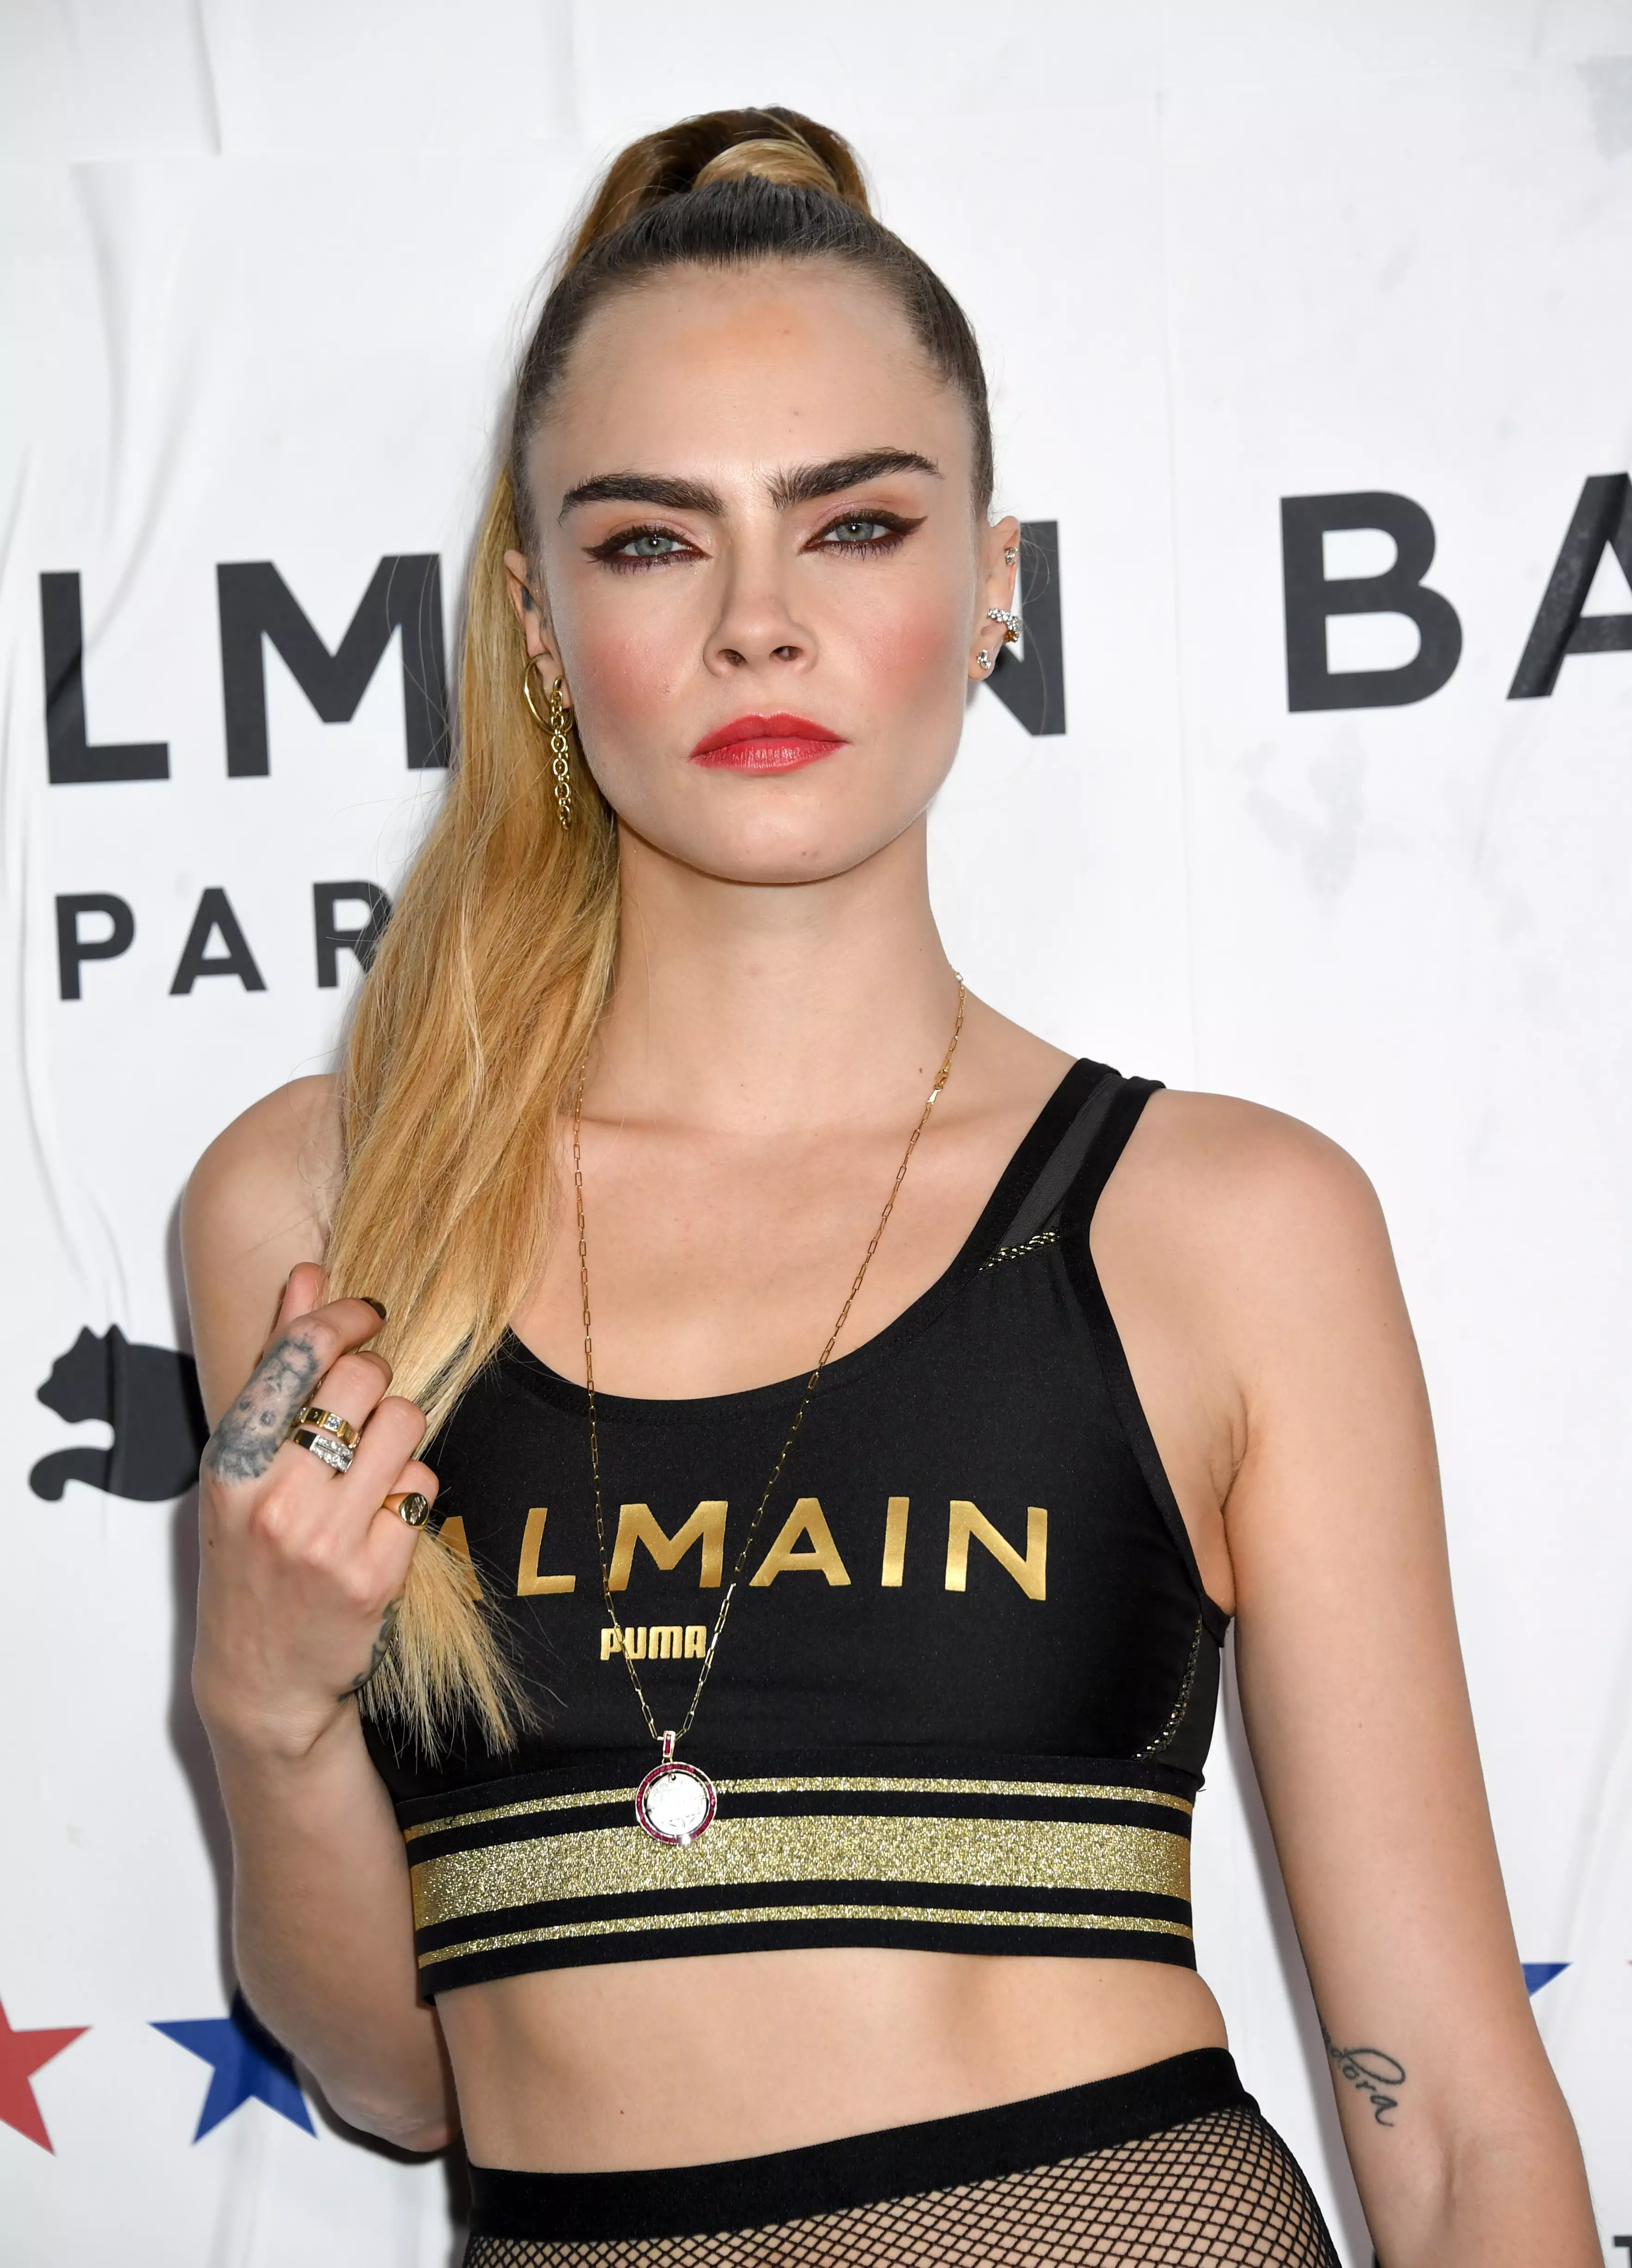 Cara is known for her outlandish attitude (